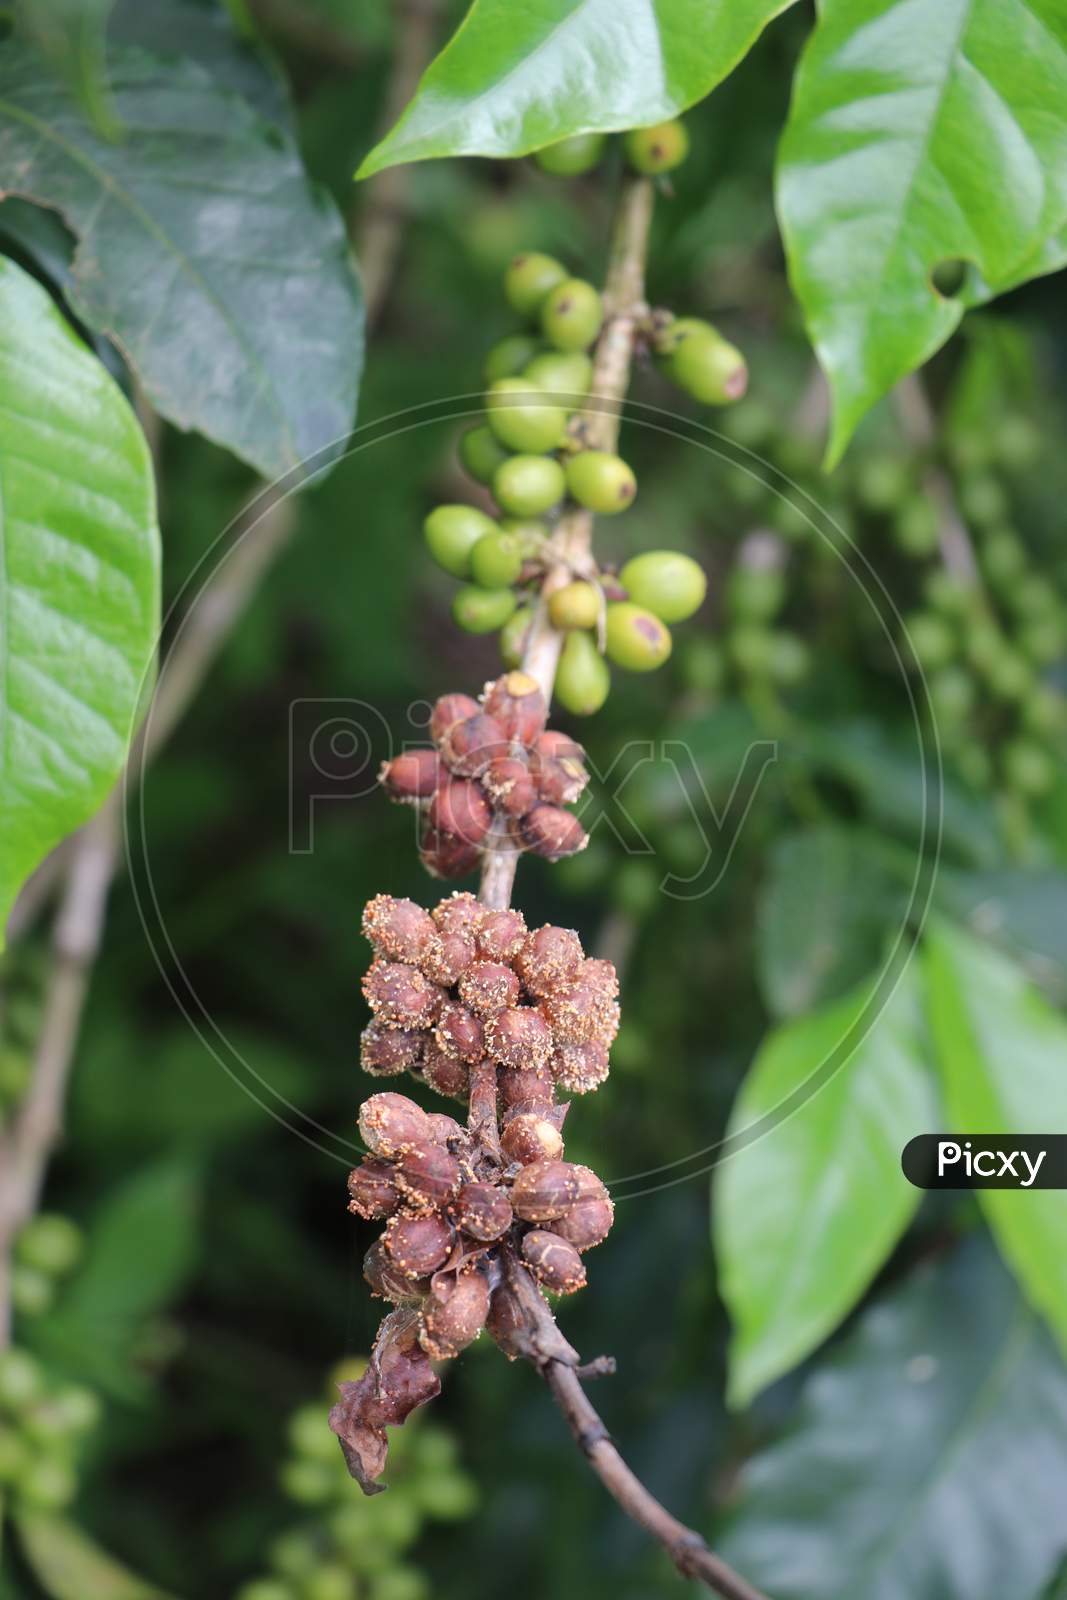 Robusta Coffee Plant With Ripe And Unripe Coffee Beans On Same Branch